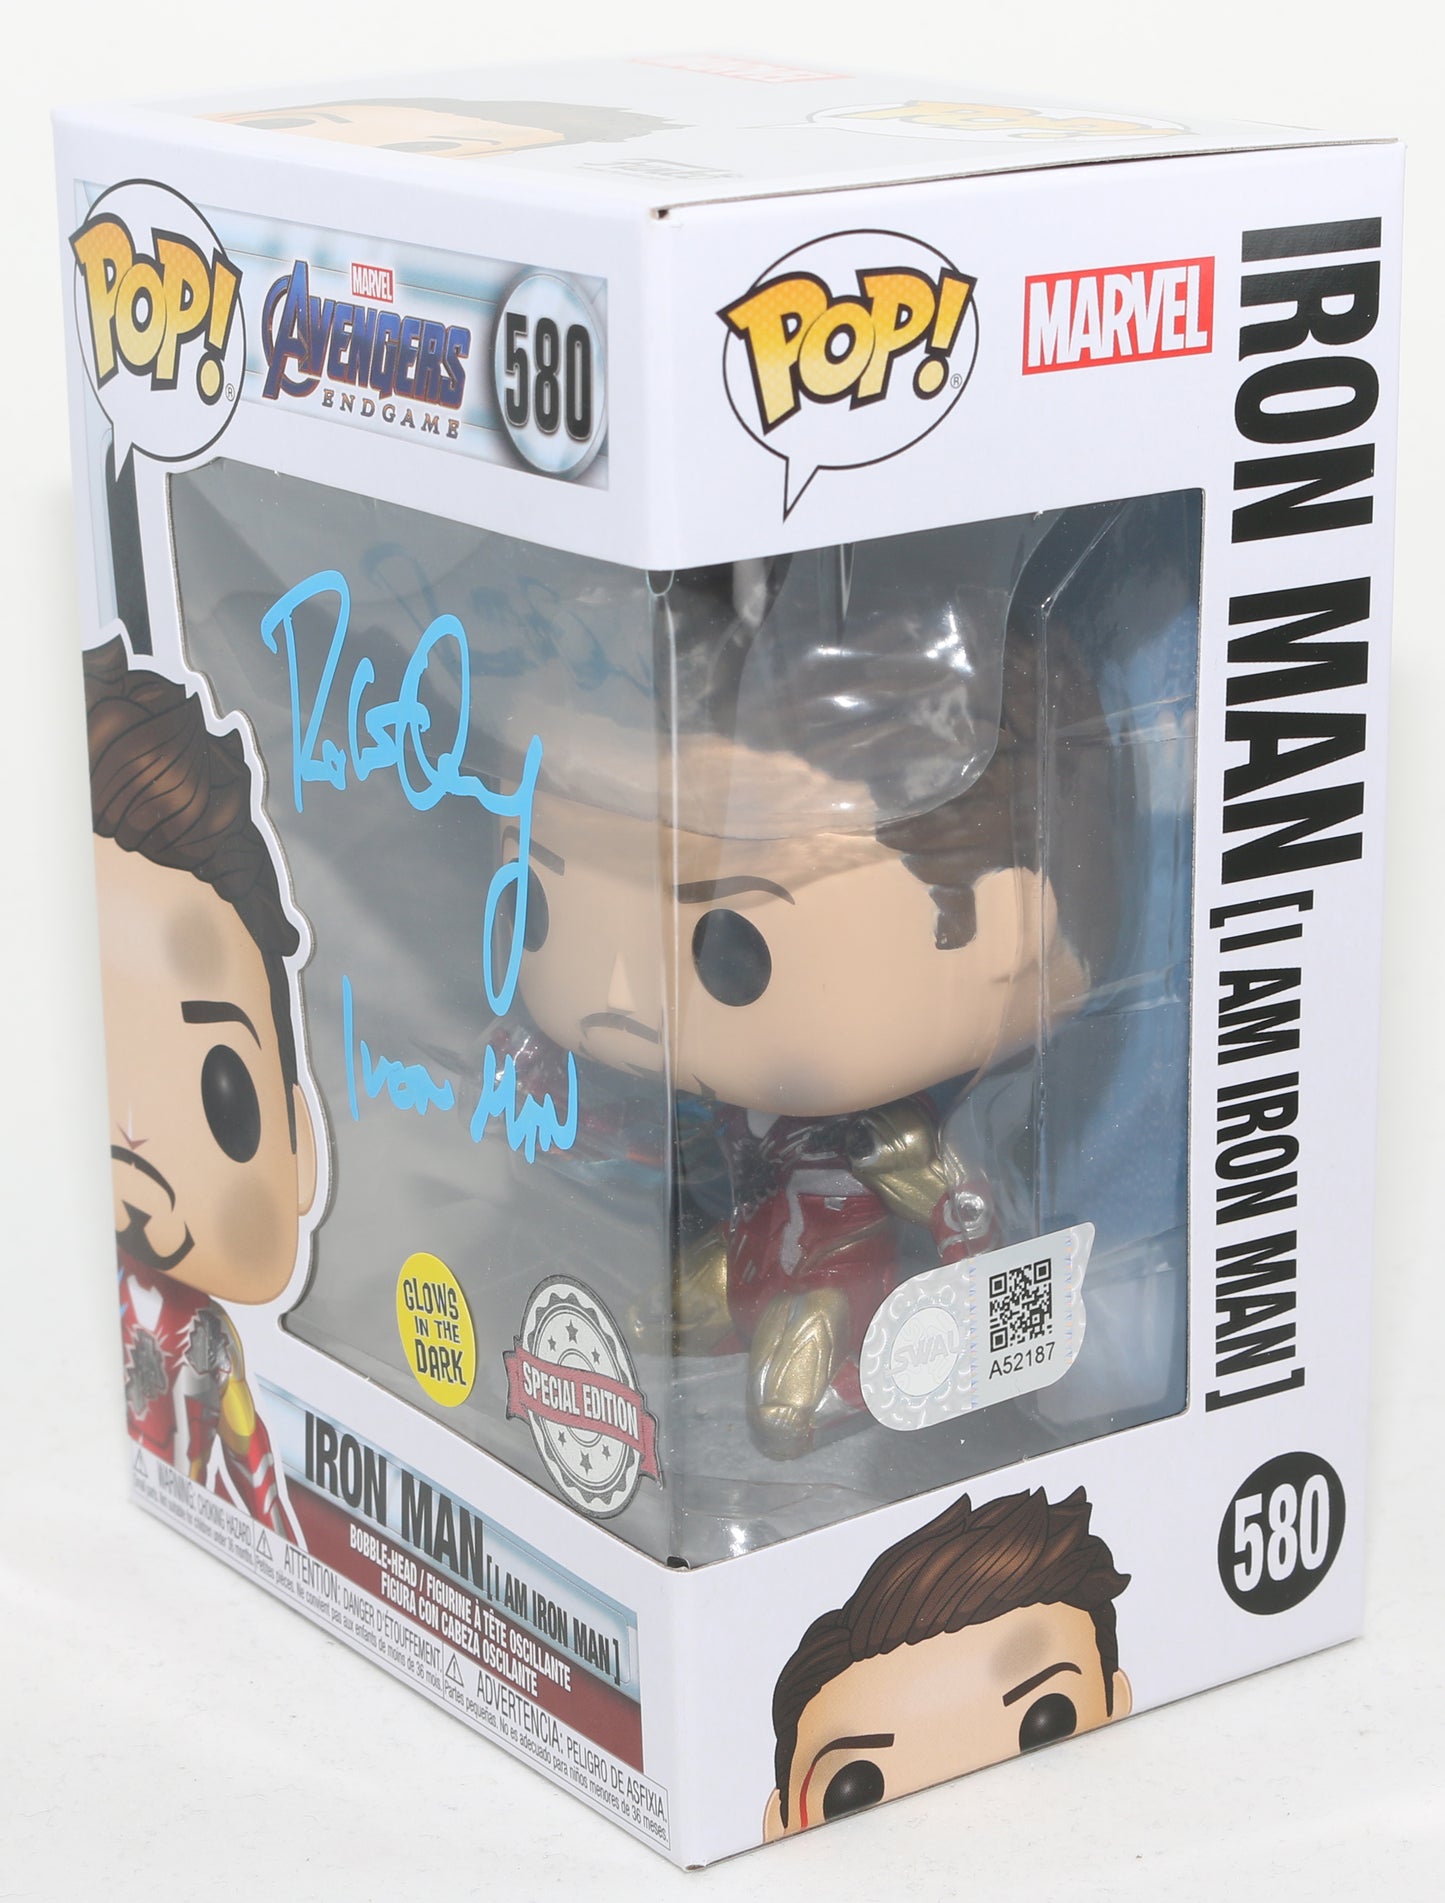 
                  
                    Robert Downey Jr. as Iron Man in Avengers: Endgame (SWAU) Signed POP! Funko #580 with Character Name
                  
                